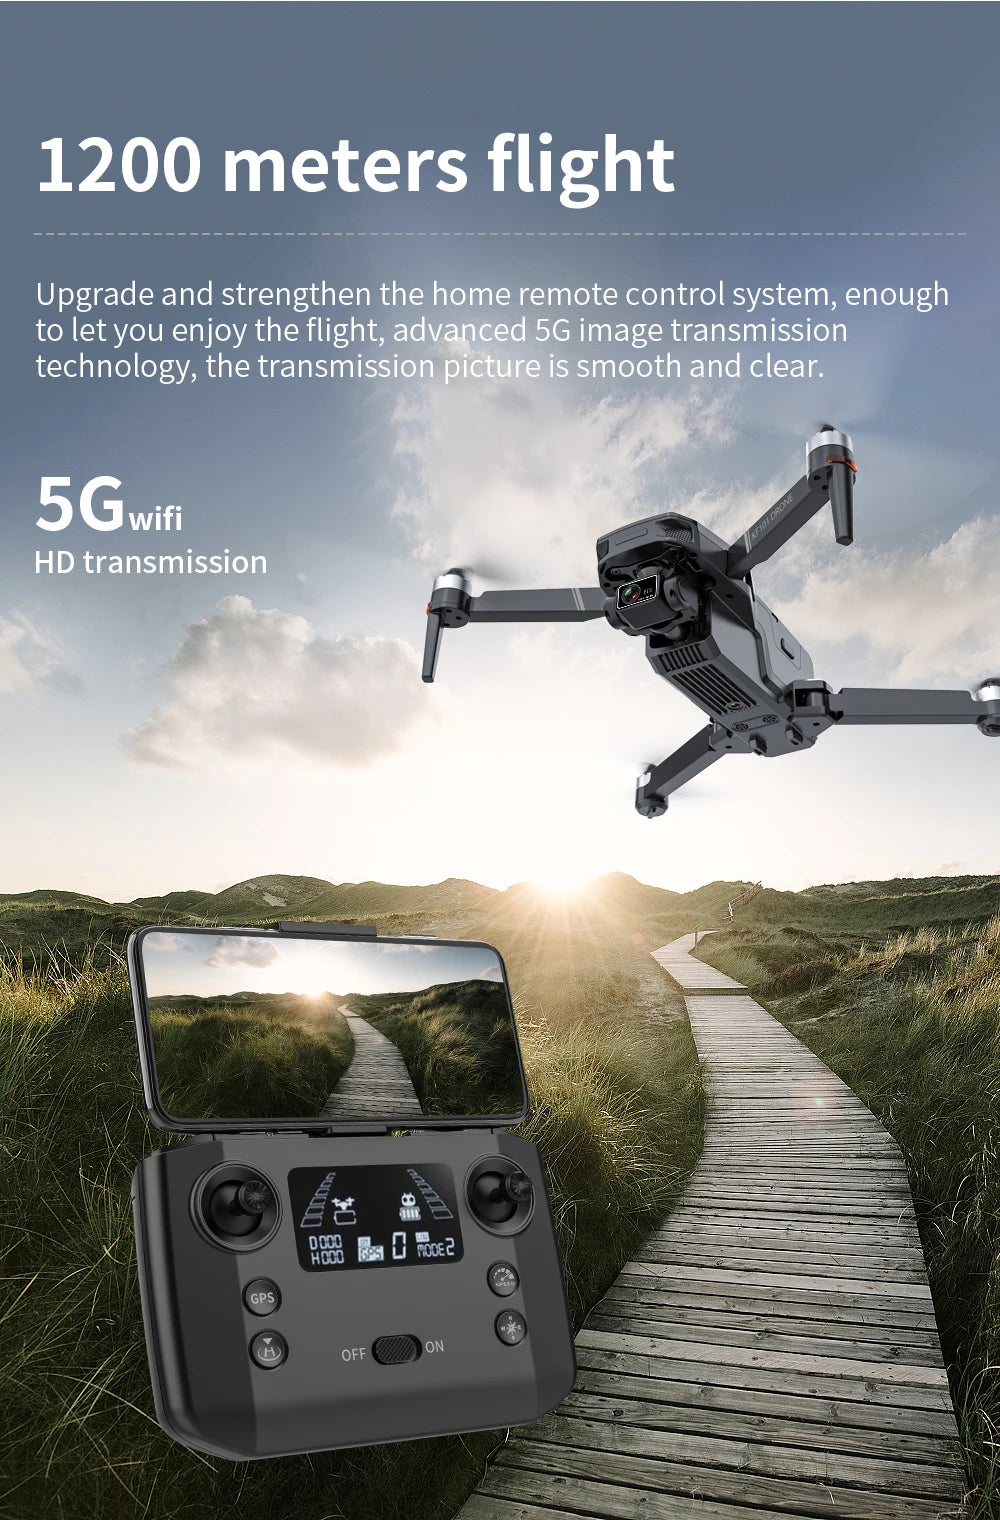 New GPS Drone, 1200 meters flight Upgrade and strengthen the home remote control system . advanced 5G image transmission